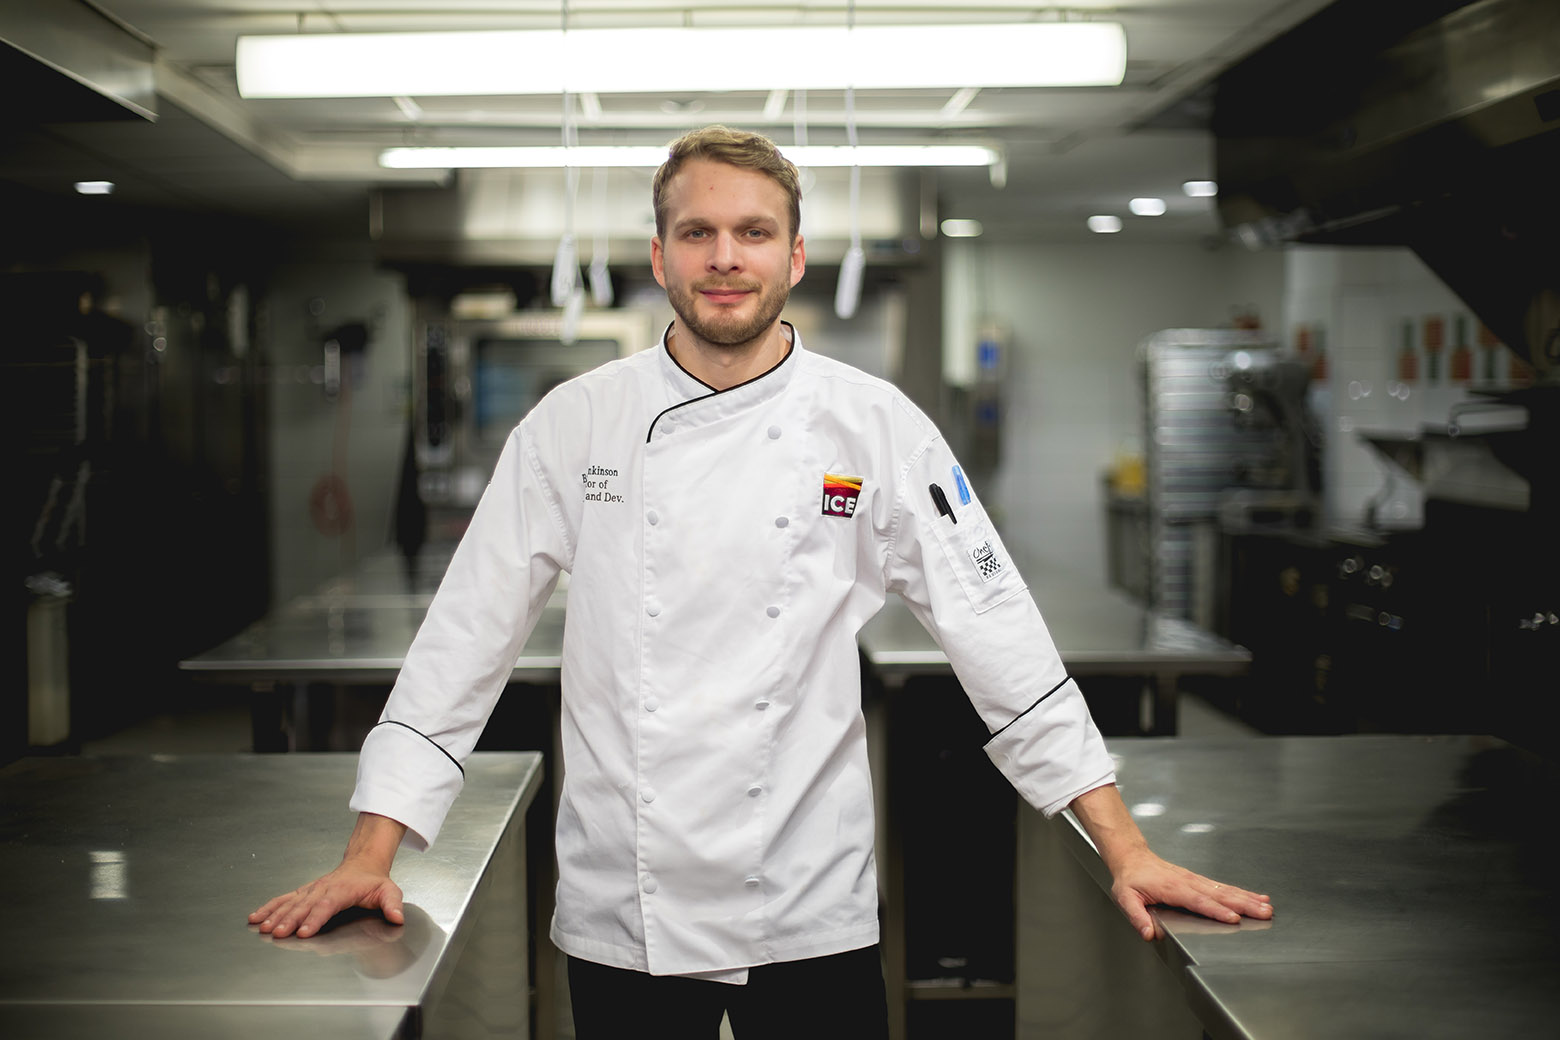 Chef Barry Tonkinson is the Director of Culinary Research at ICE.